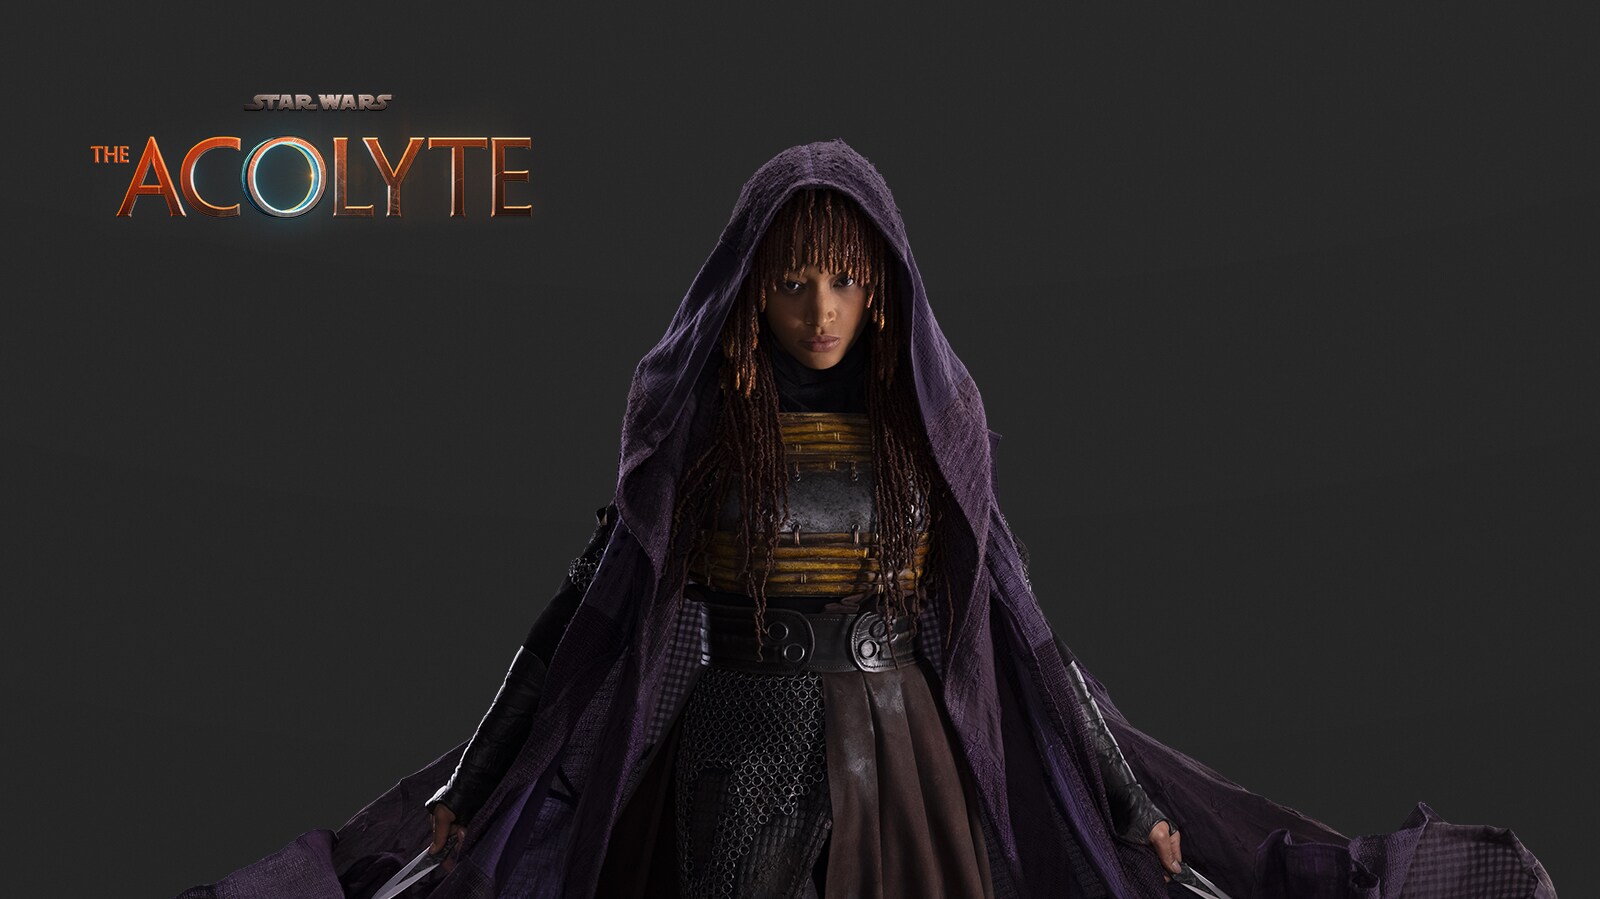 Mae, the assassin, in her traveling cloak.